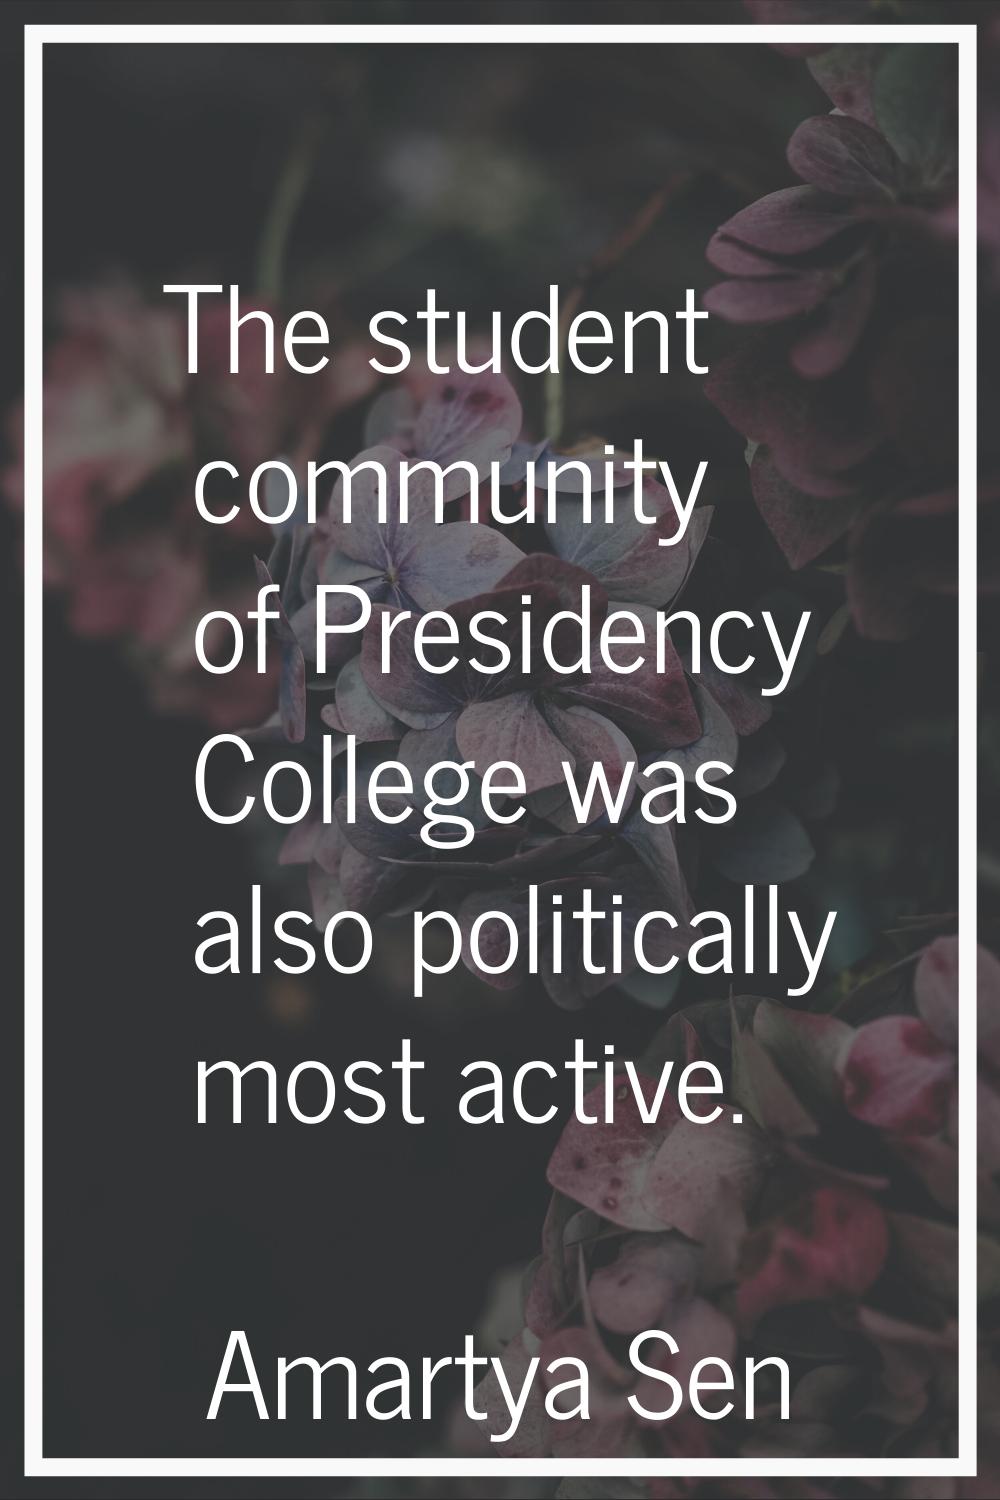 The student community of Presidency College was also politically most active.